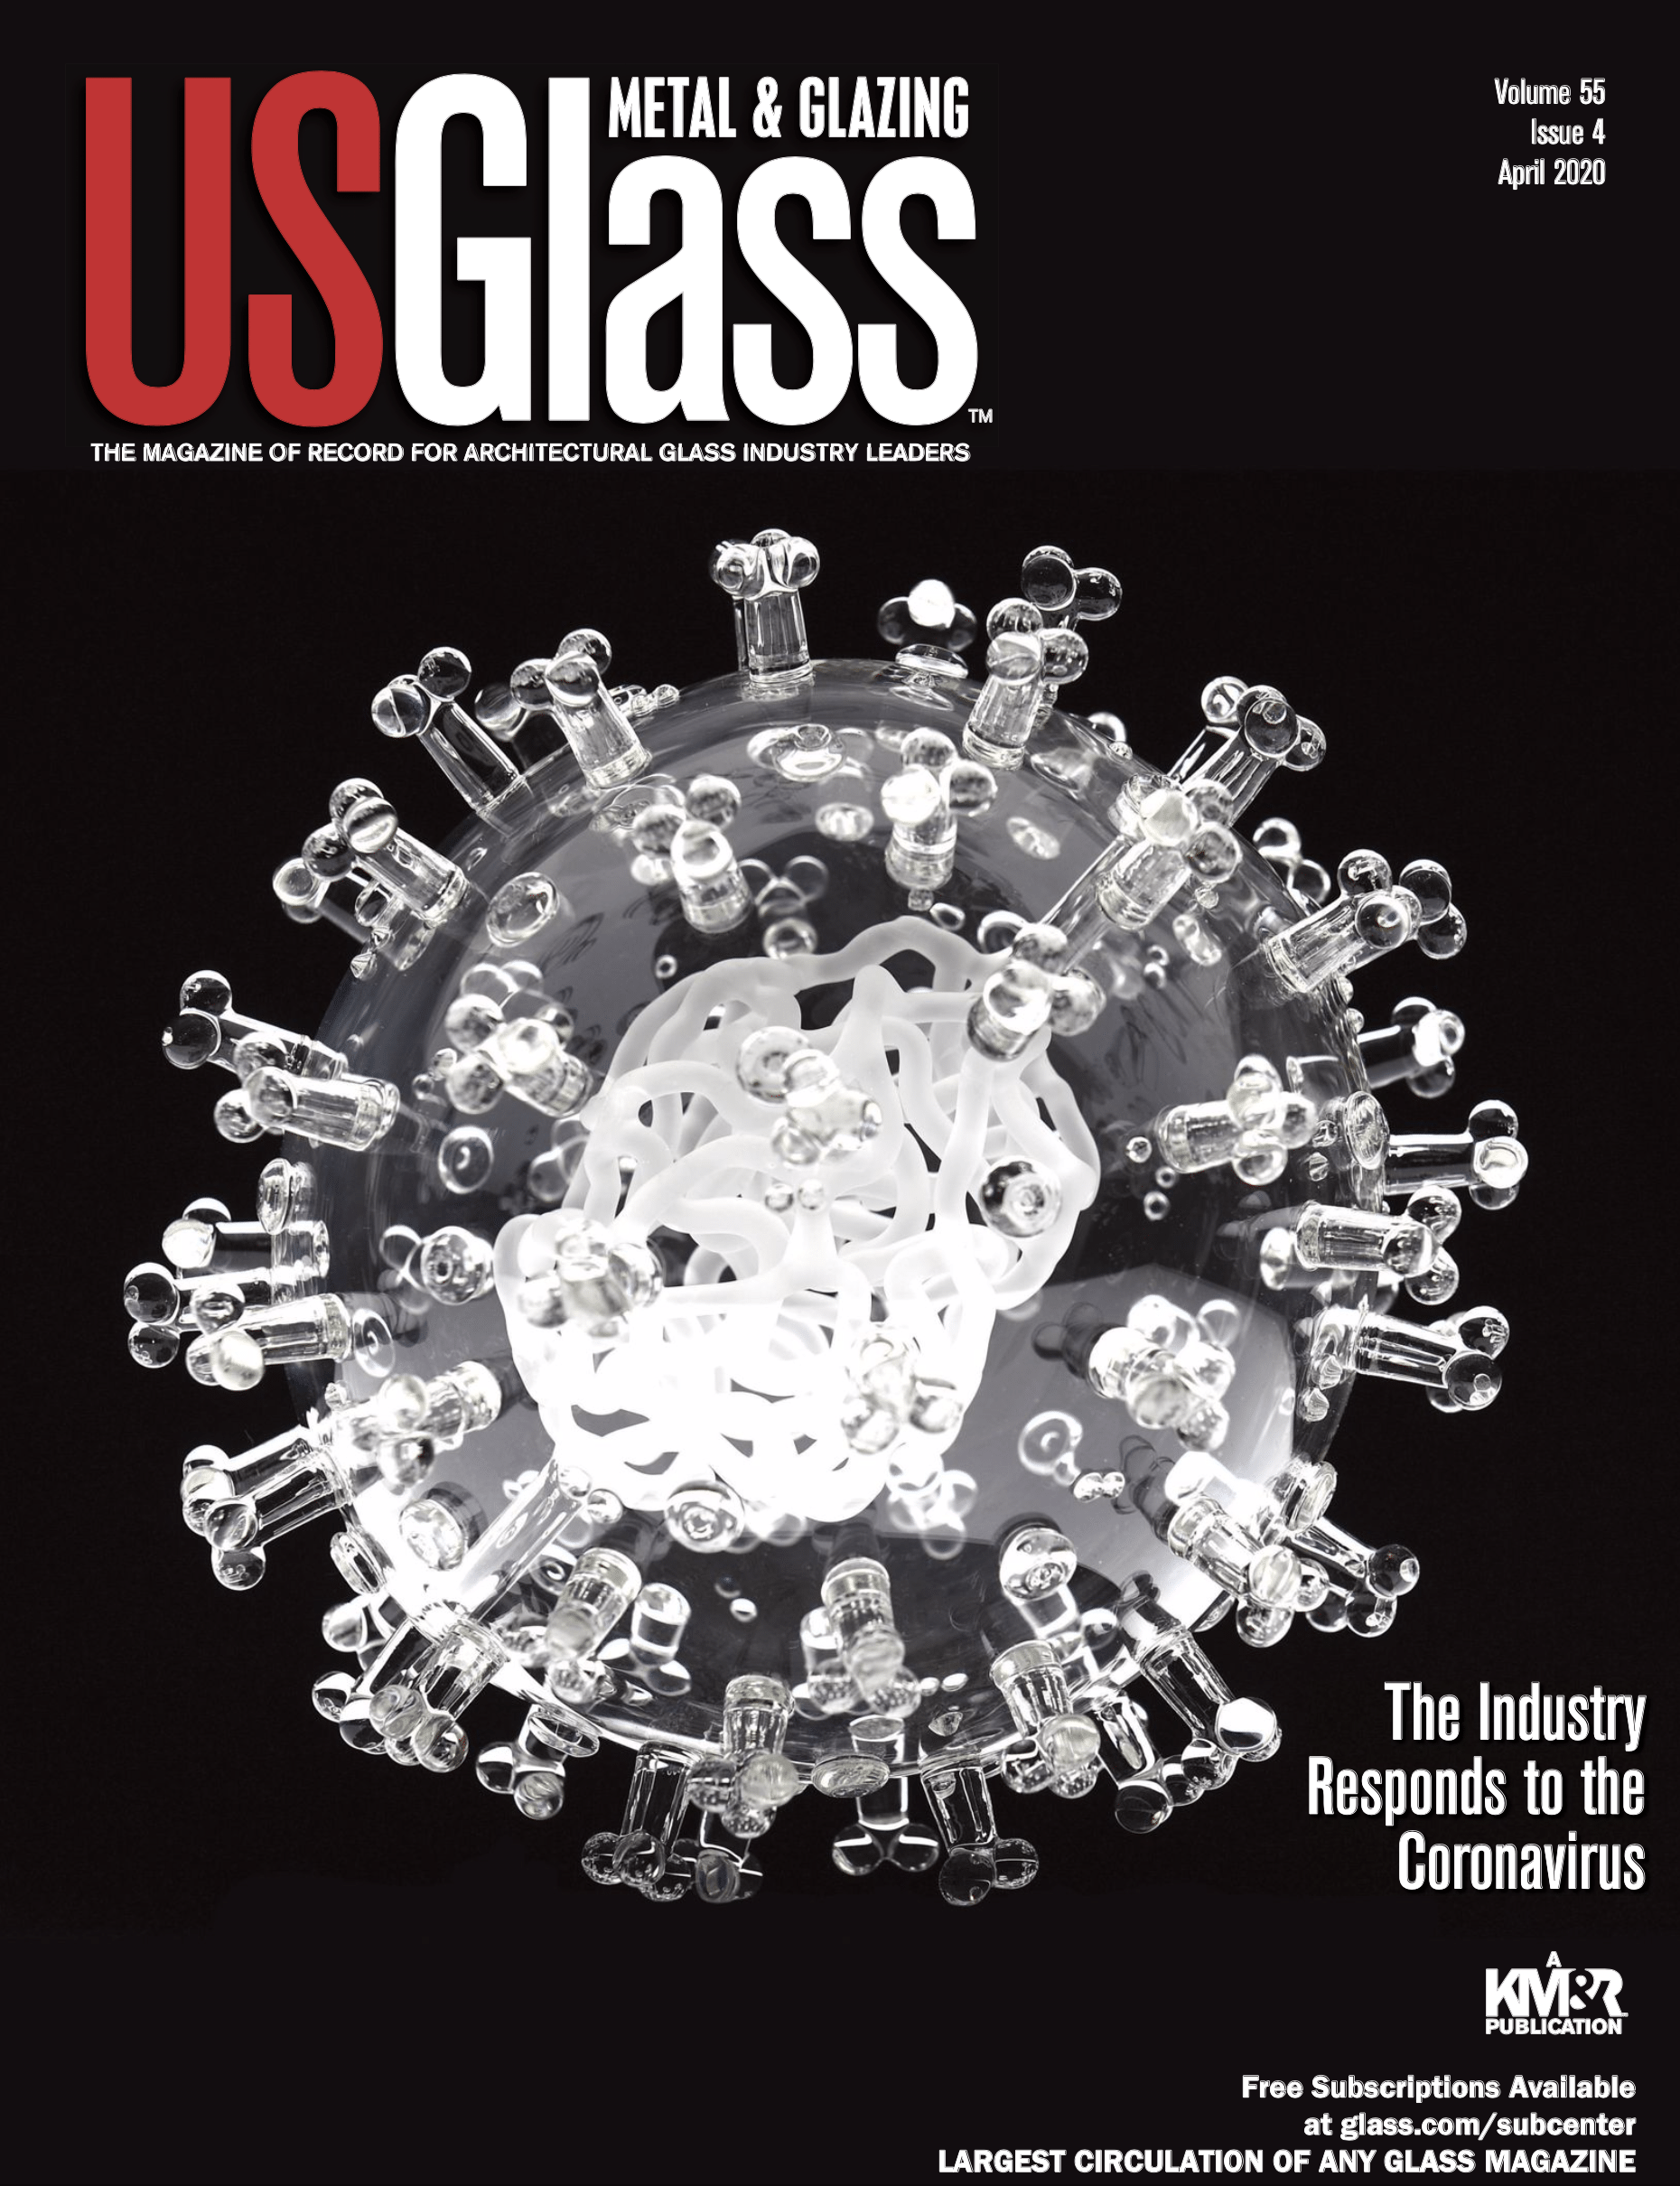 US Glass New Column: The View by Nataline Lomedico, CEO of Giroux Glass